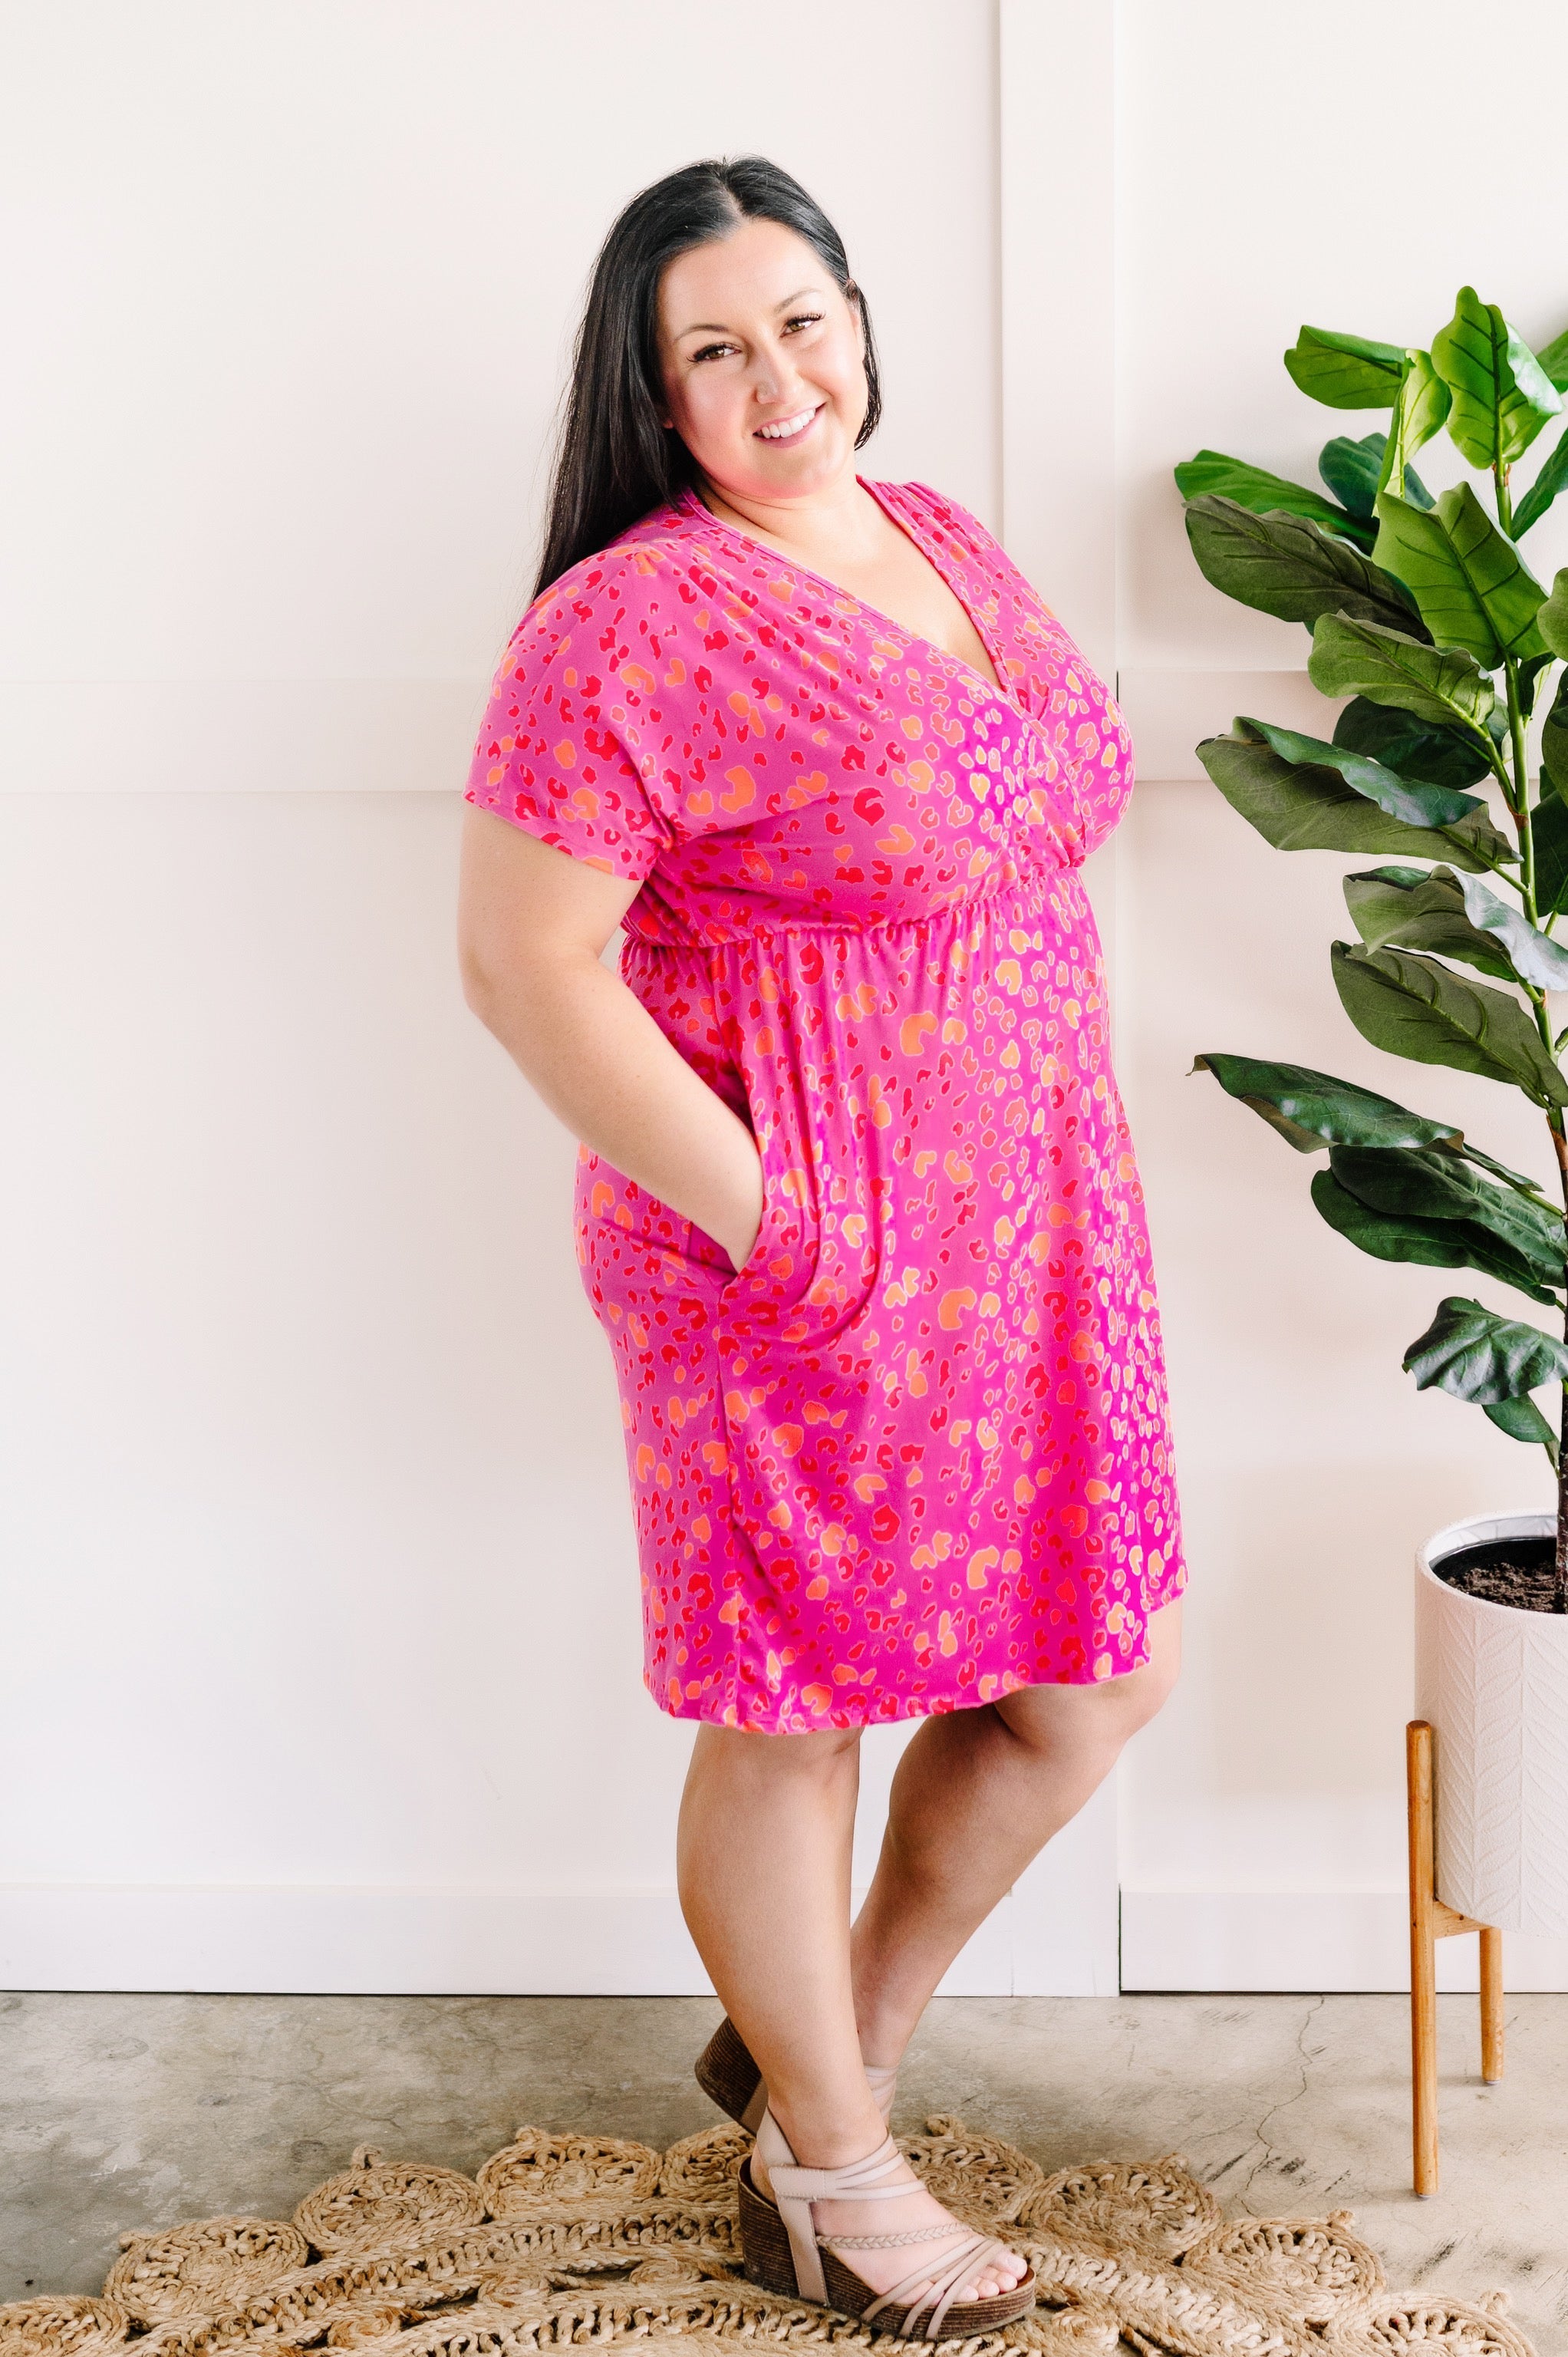 Surplice Dress With Pockets In Jolly Animal Print